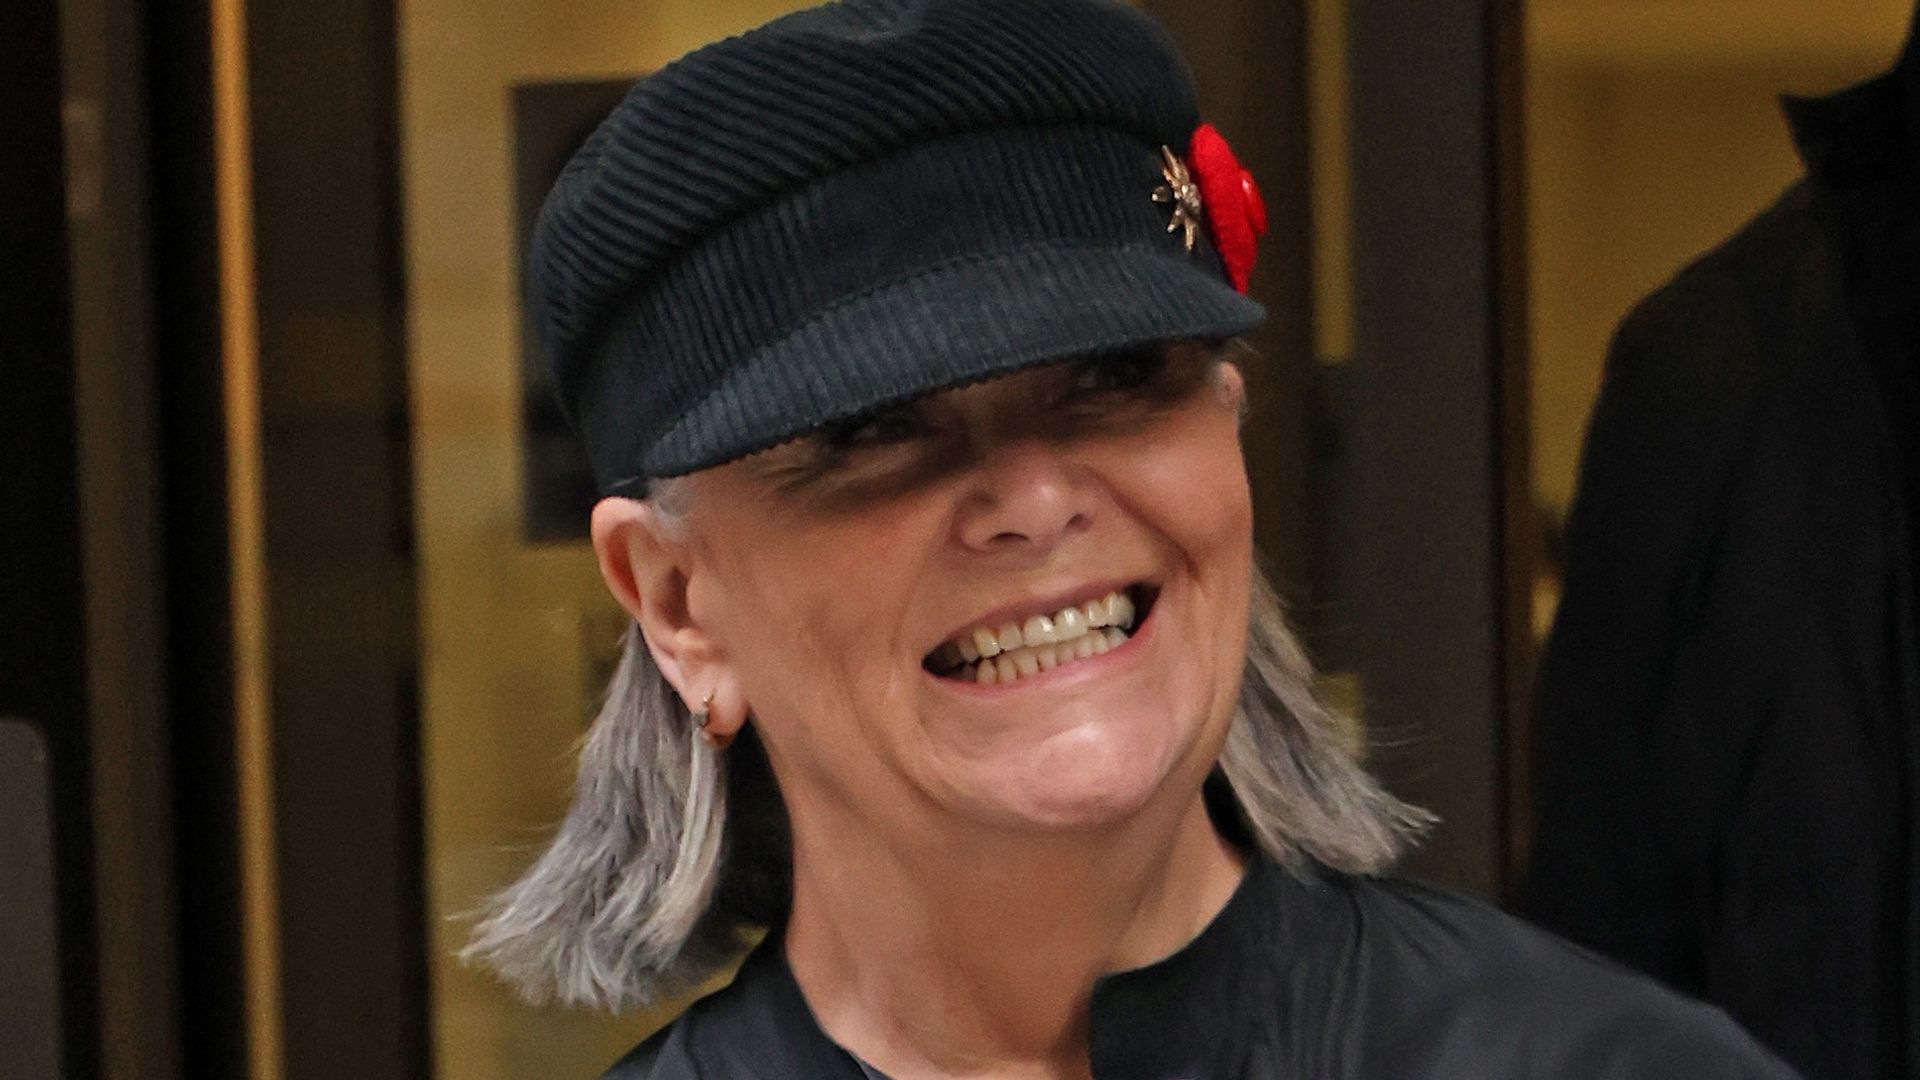 Dawn French in a black hat and jacket leaving BBC Radio 2 in 2022